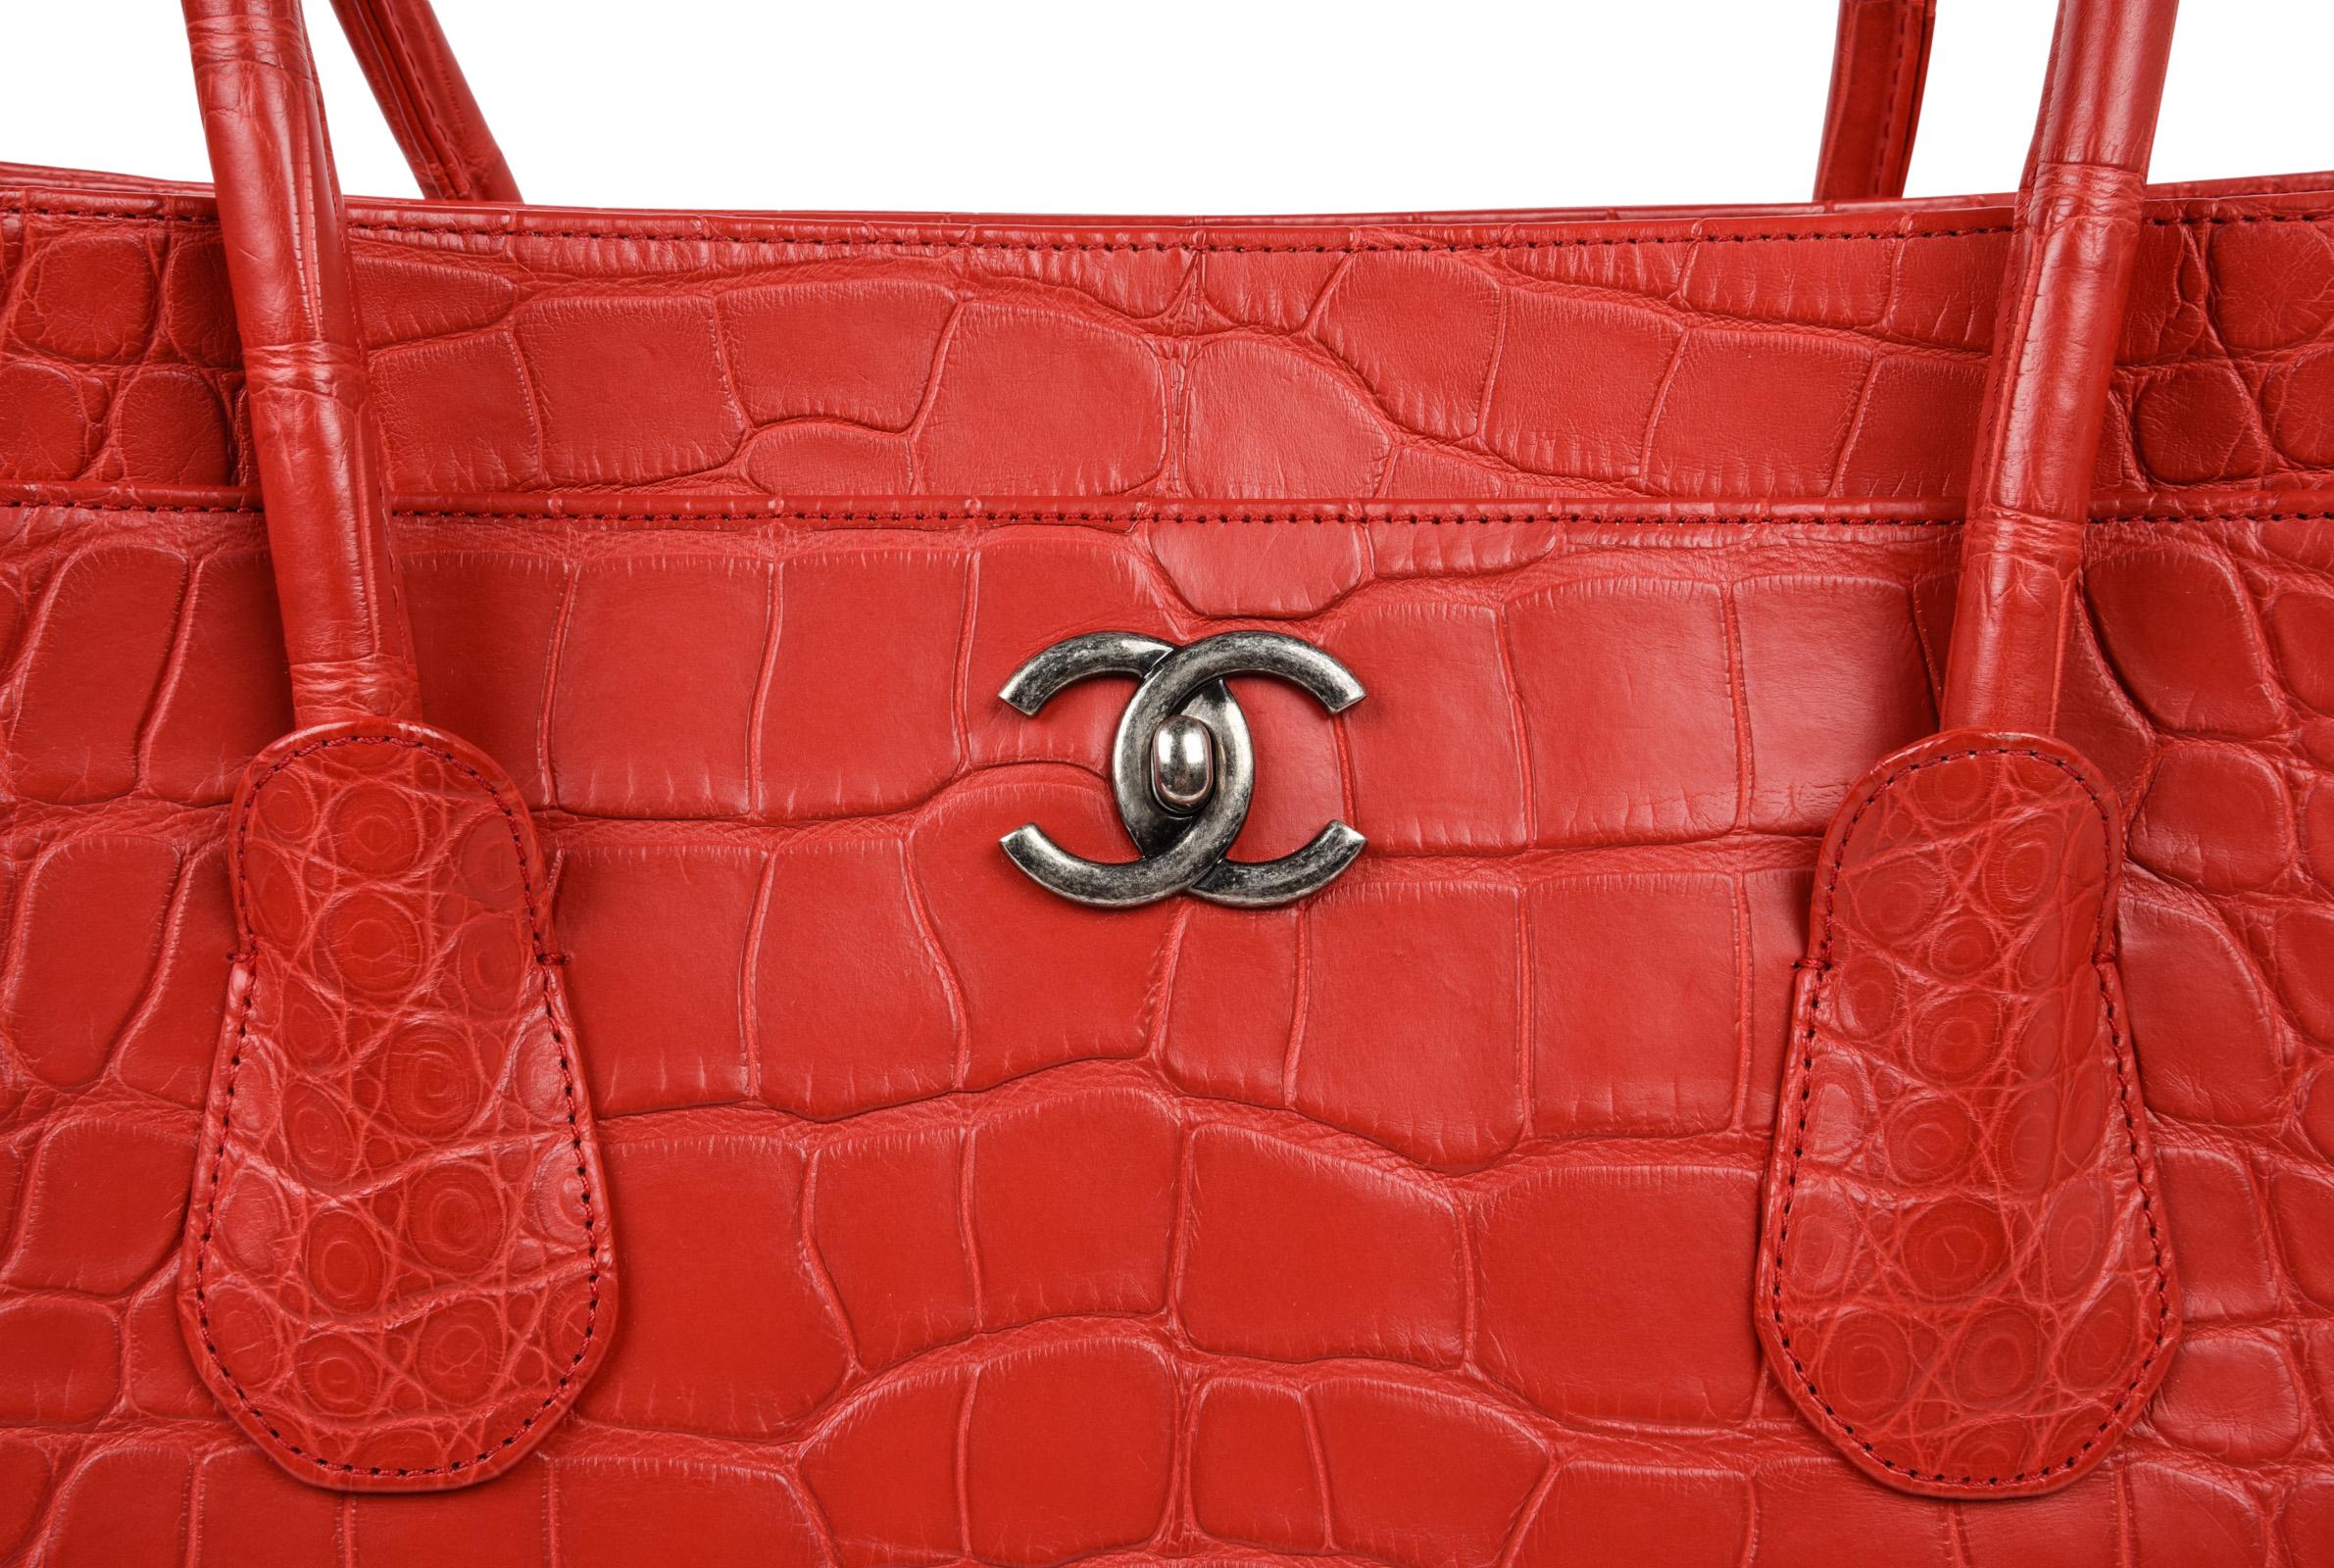 Guaranteed authentic Chanel rare matte alligator red rose Cerf tote bag.
A collectors find as Chanel no longer produces alligator bags!
Classic with front slot pocket with signature CC turnkey for closure.
Center hidden wide tab with magnetic